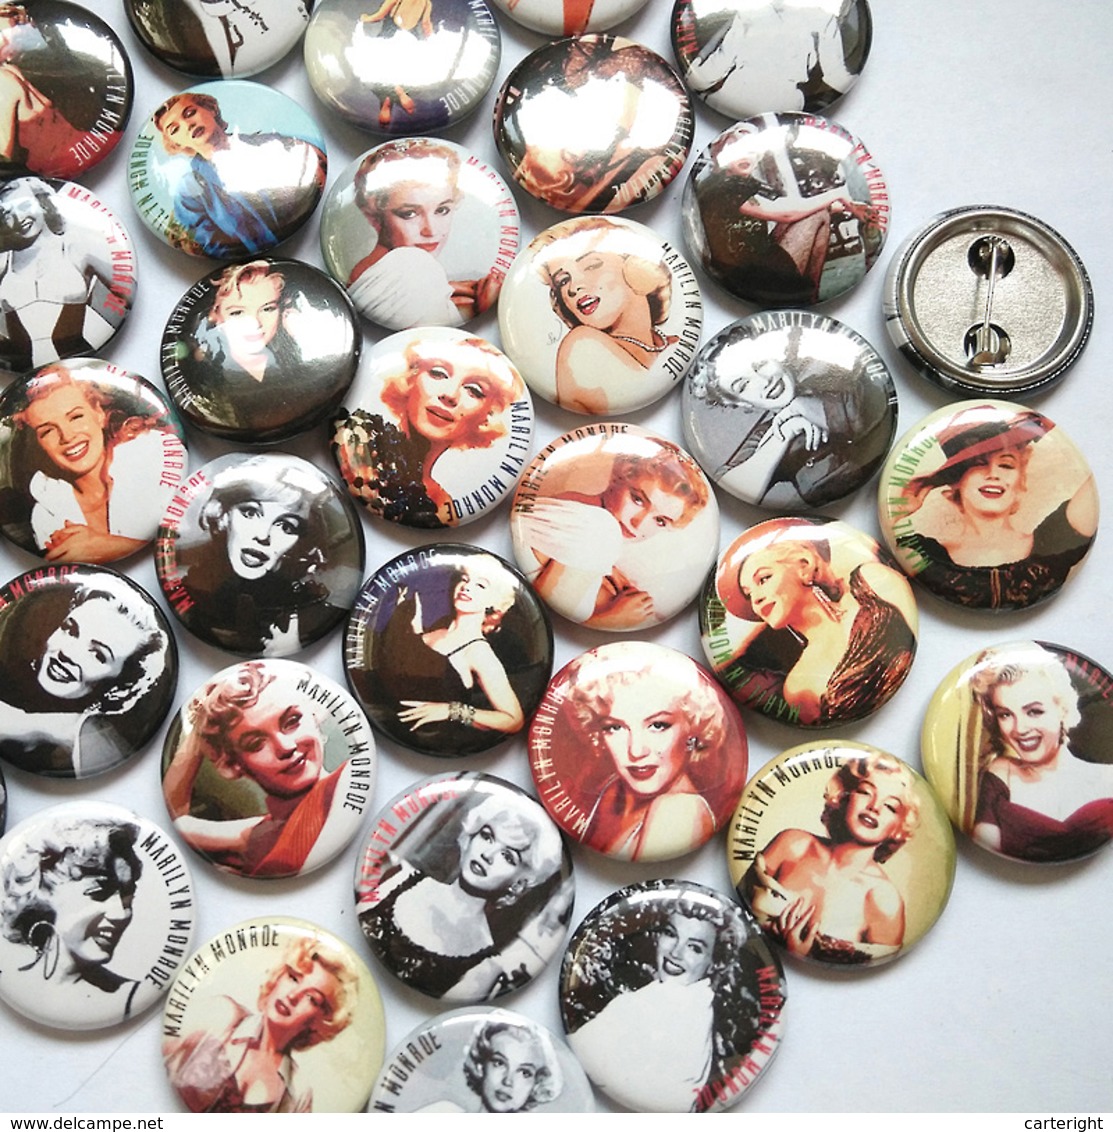 Marc chagall painting fan ART BADGE BUTTON PIN SET 7 (1inch/25mm diameter) 35 DIFF